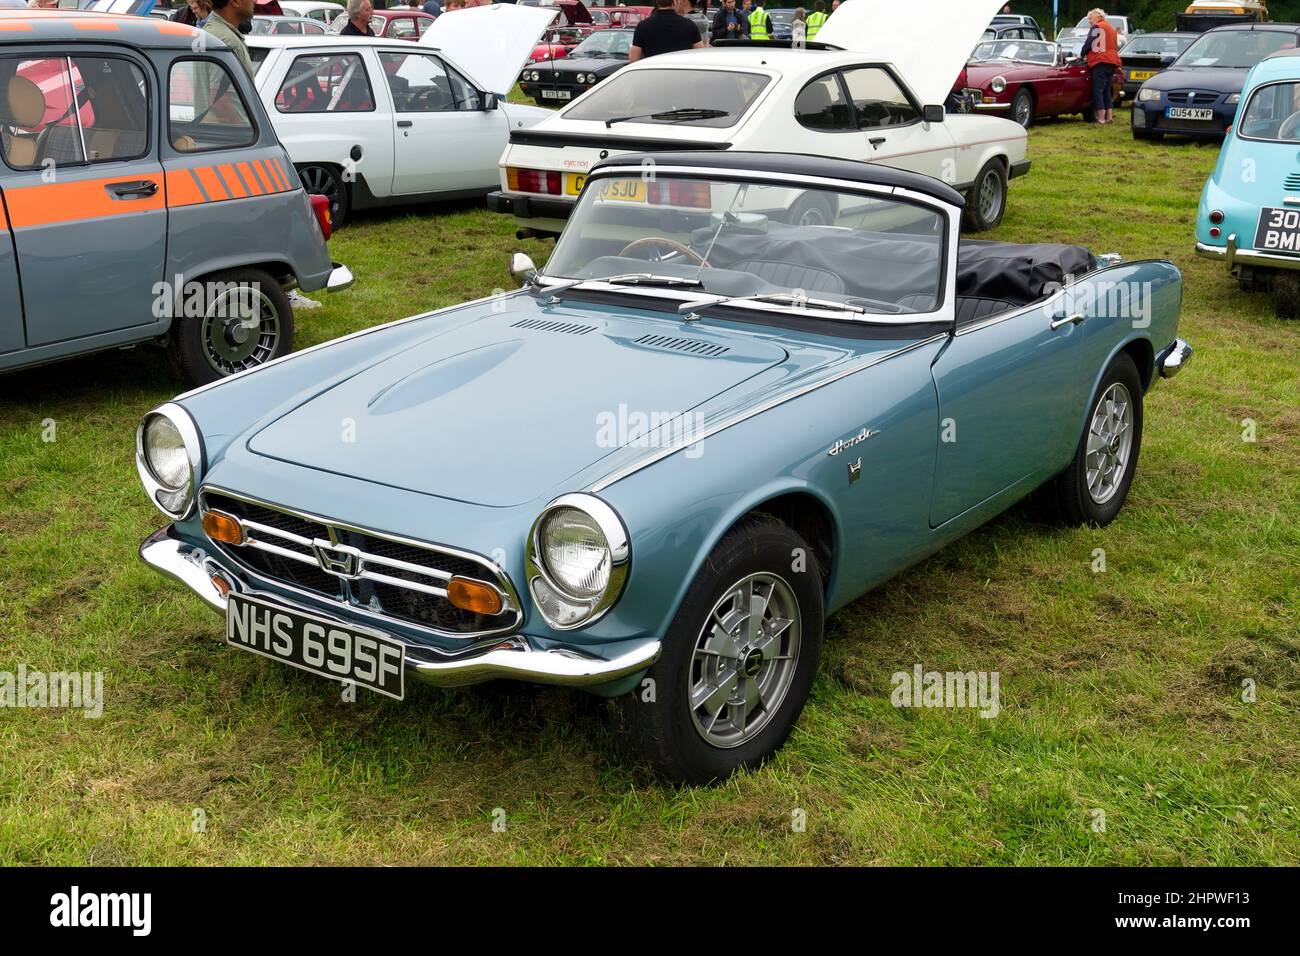 Westbury, Wiltshire, UK - September 5 2021: A 1967 Honda S800  2-Door Roadster Sports Car at the 2021 White Horse Classic and Vintage Car Show Stock Photo